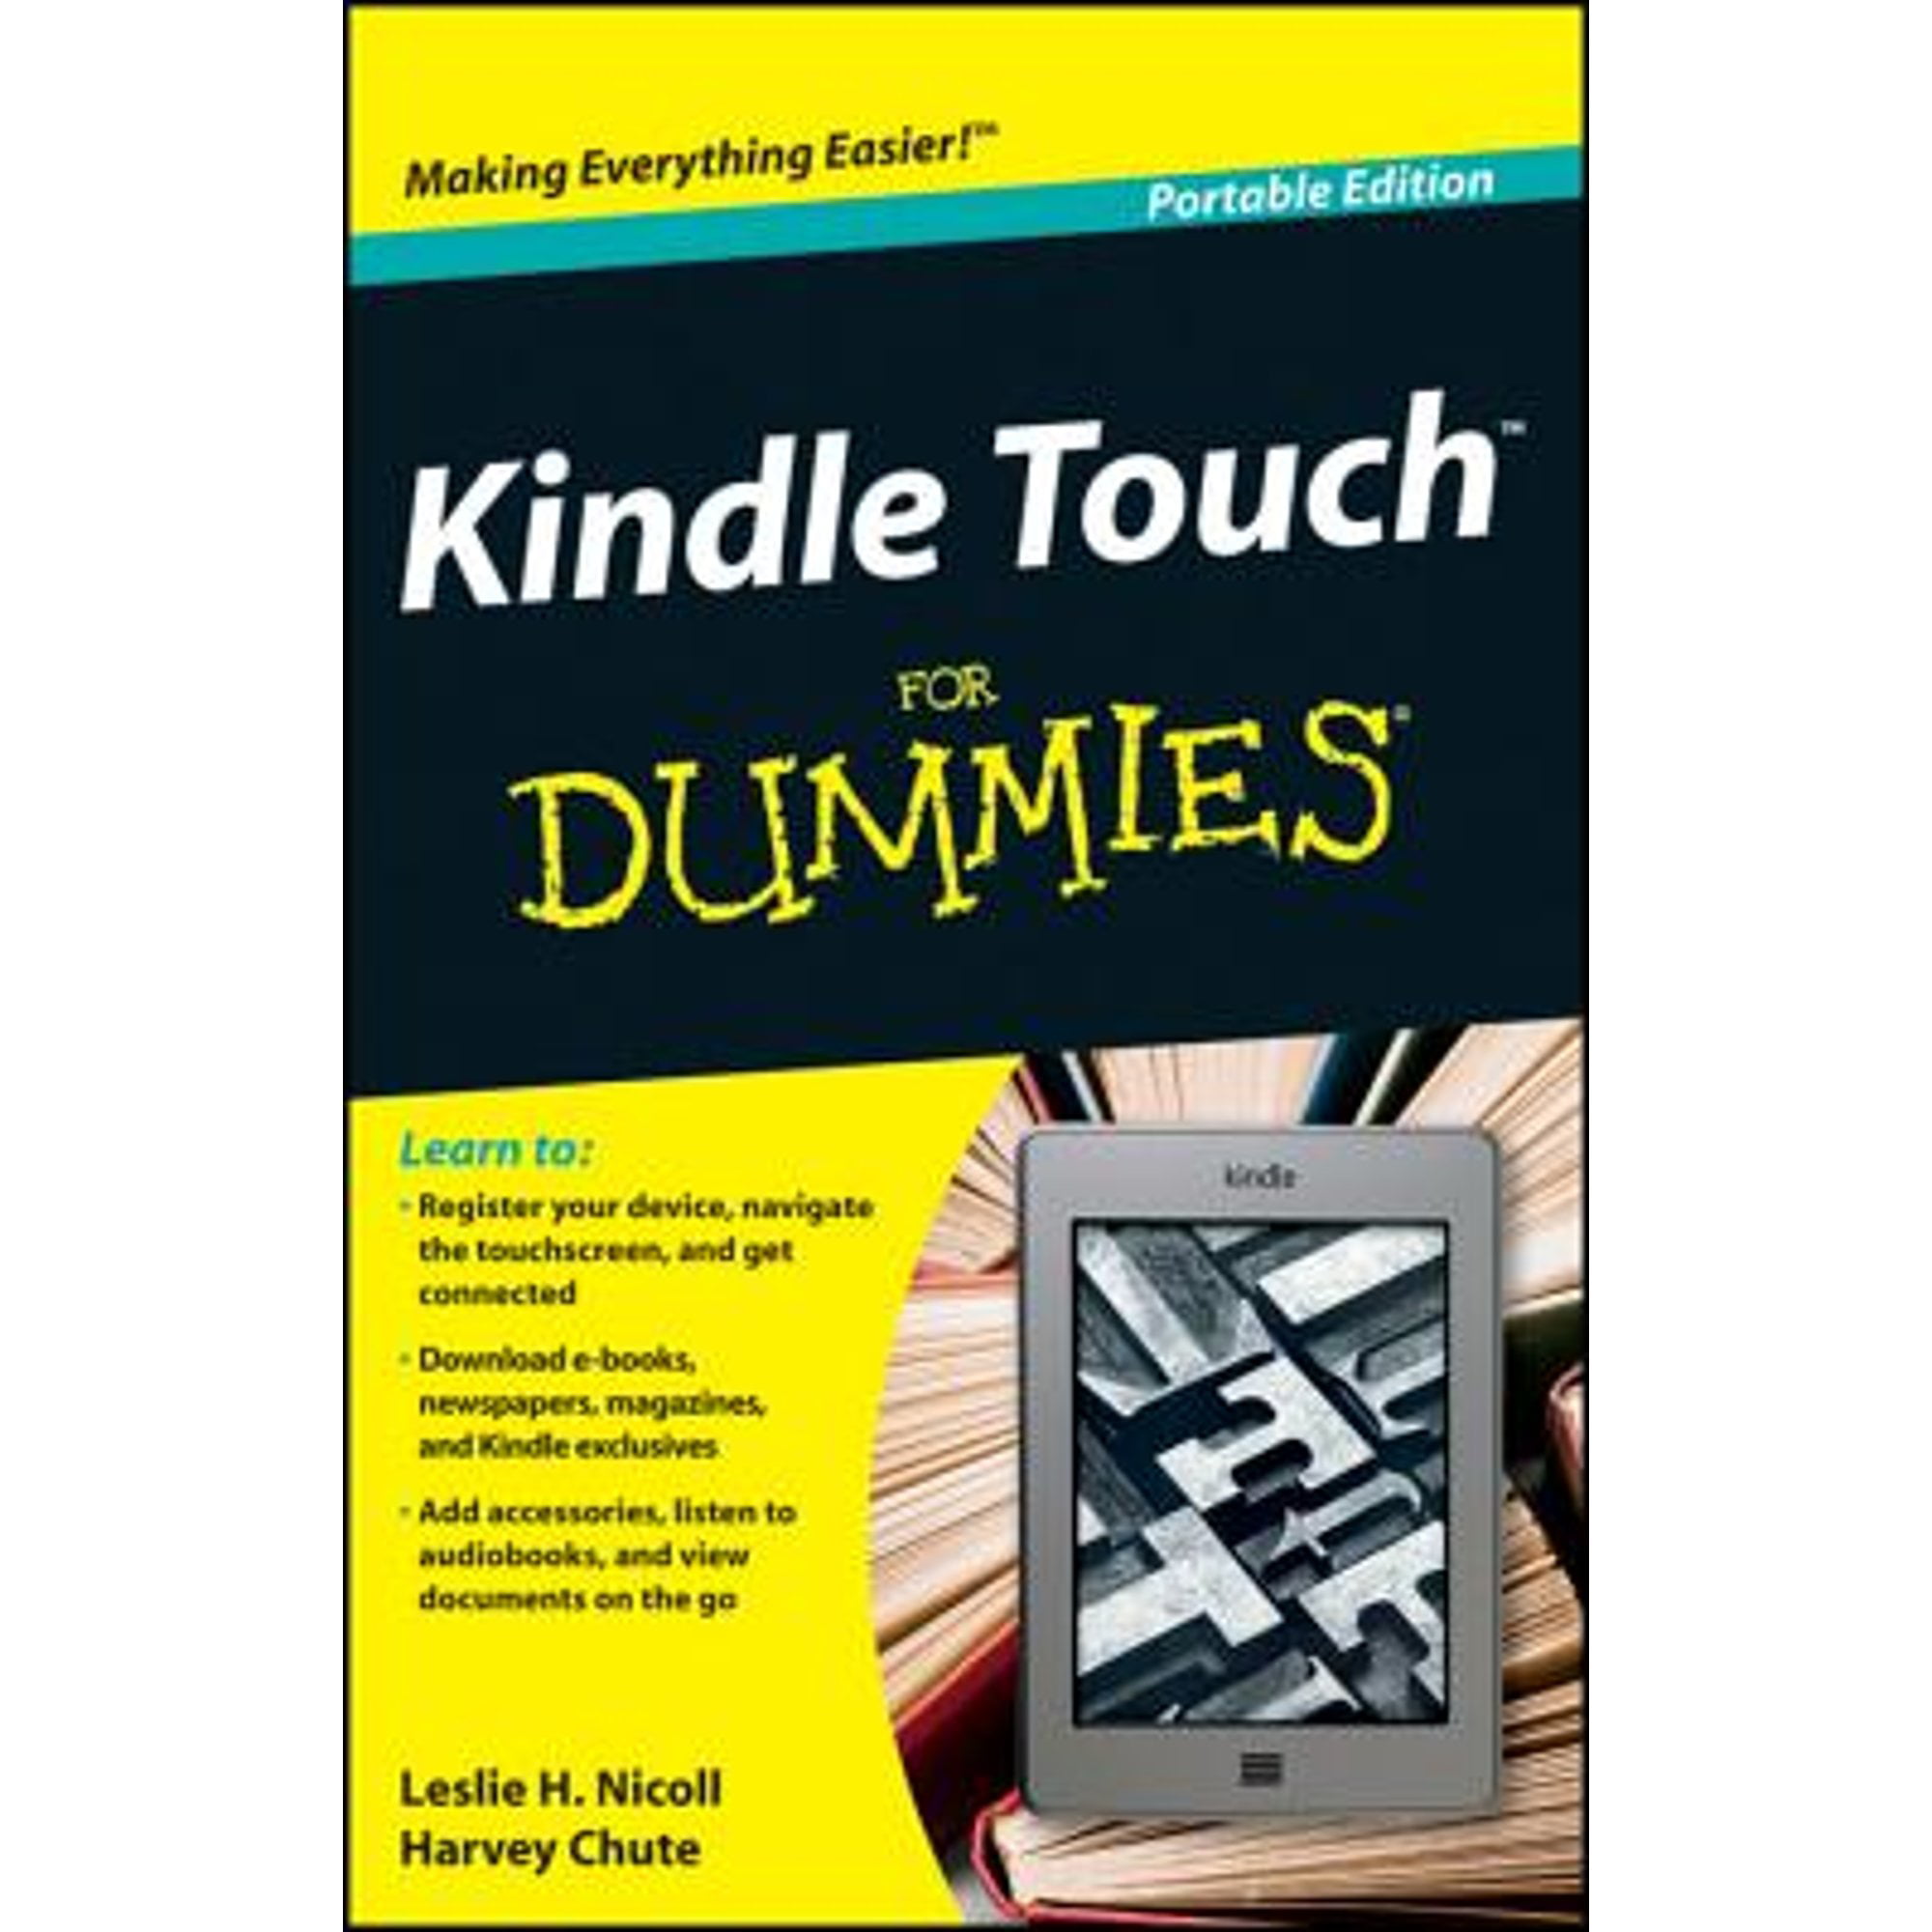 Pre-Owned Kindle Touch For Dummies Portable Edition  Paperback Harvey Chute, Leslie H. Nicoll